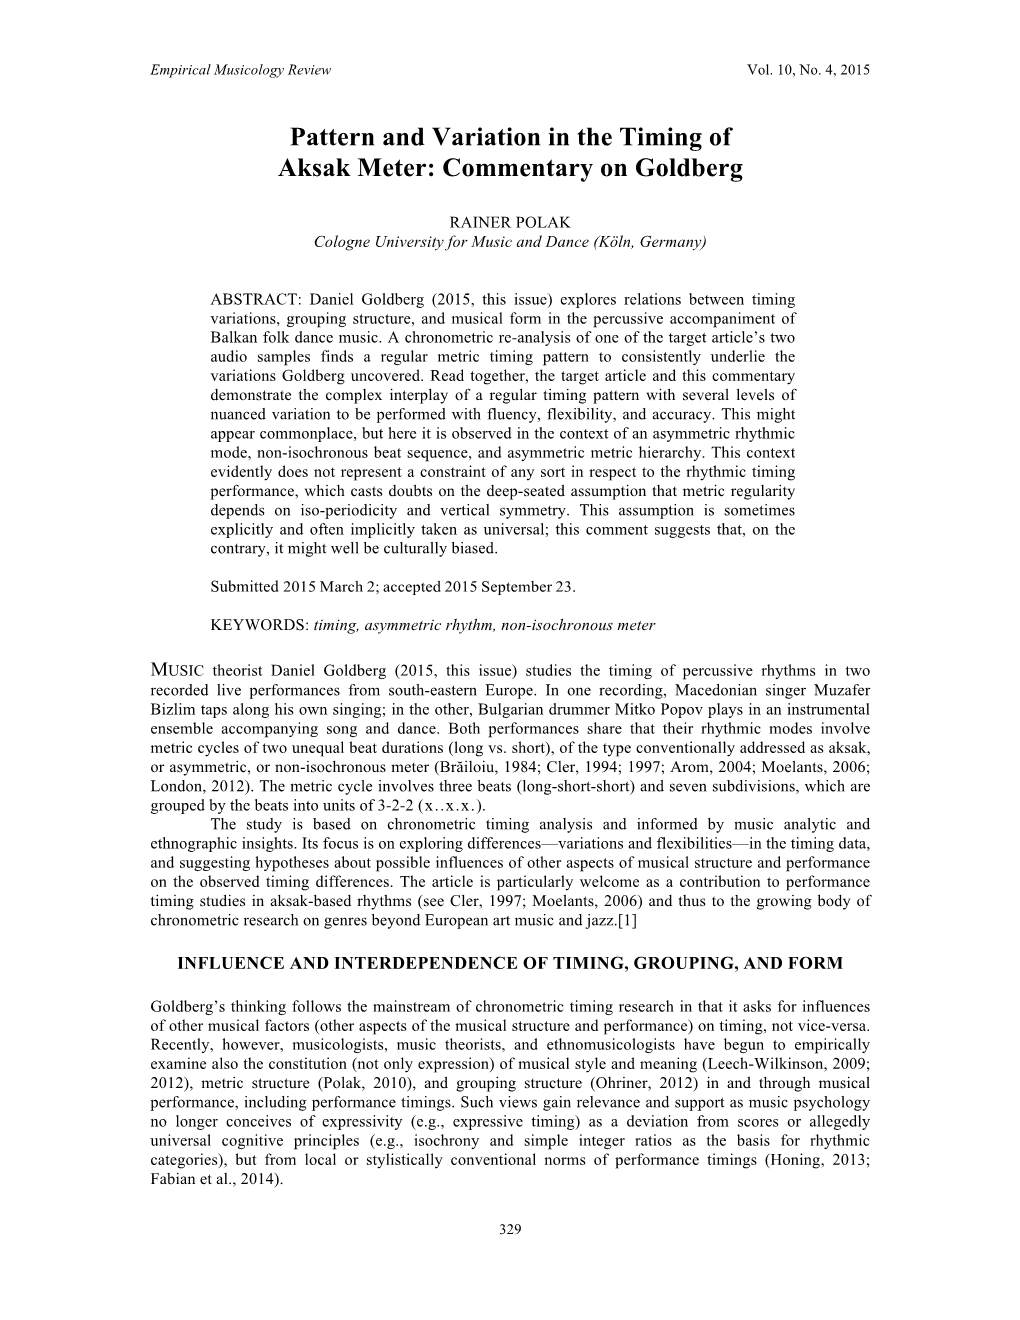 Pattern and Variation in the Timing of Aksak Meter: Commentary on Goldberg